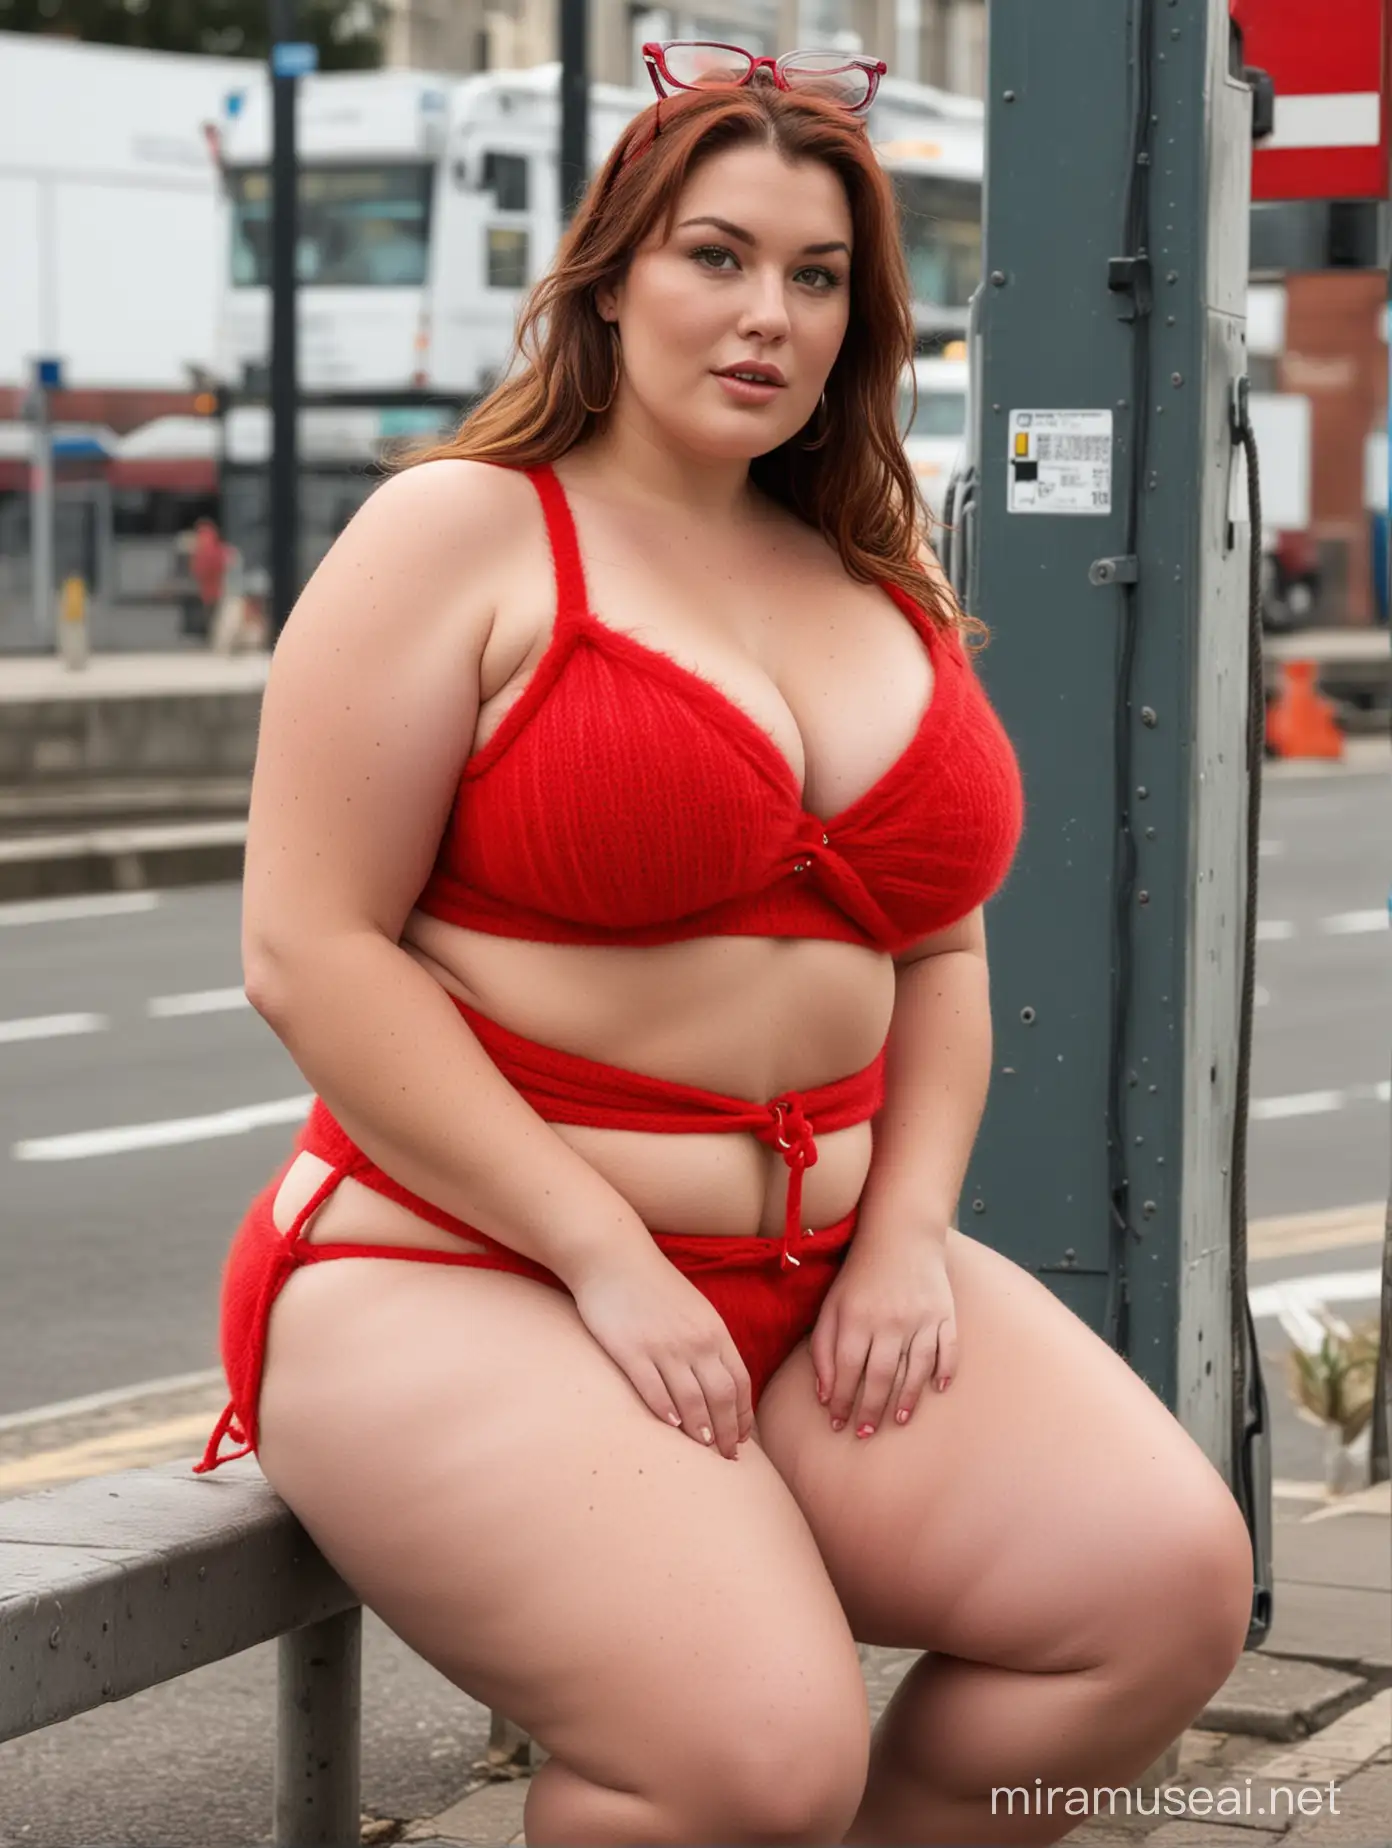 curvy plus-size woman with huge round soft outsize boobs, wearing only an extremely thick red fuzzy cable-knit mohair wool bikini, sitting at a bus stop